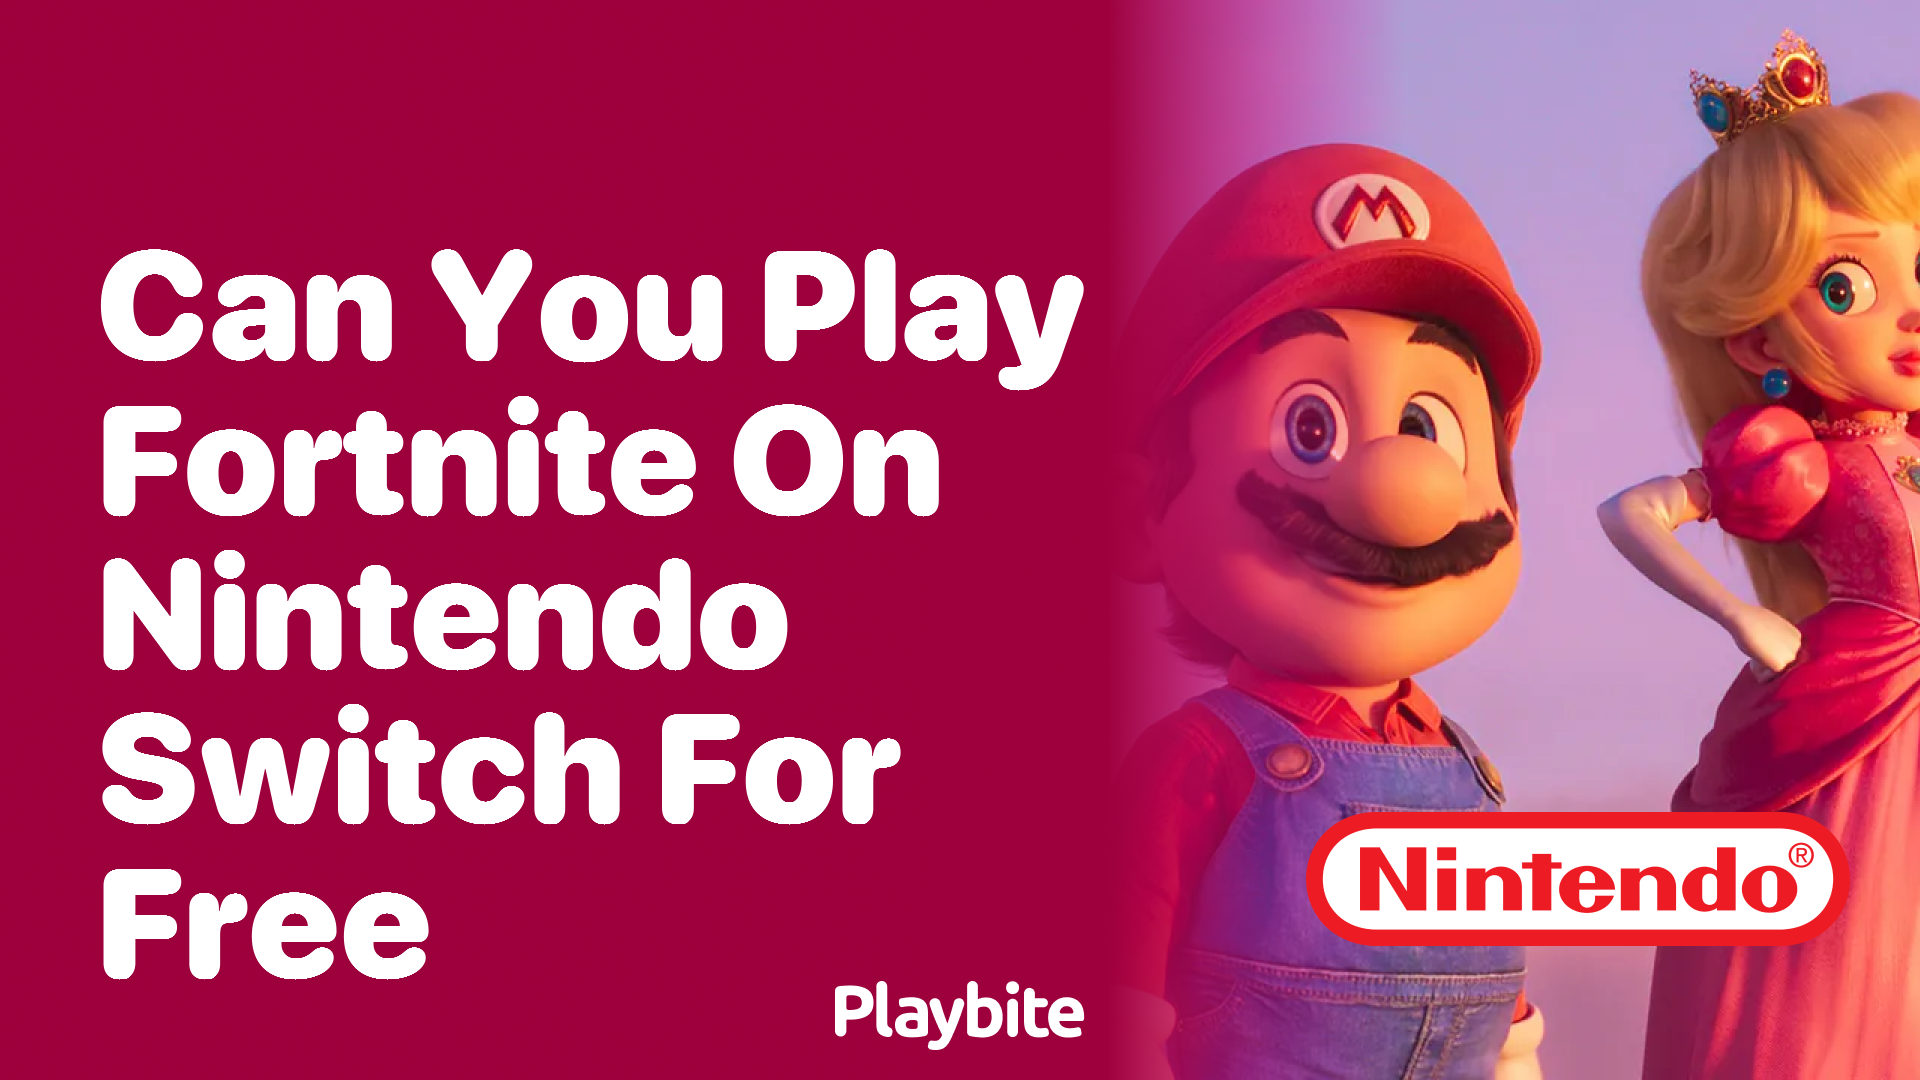 Can You Play Fortnite on Nintendo Switch for Free?